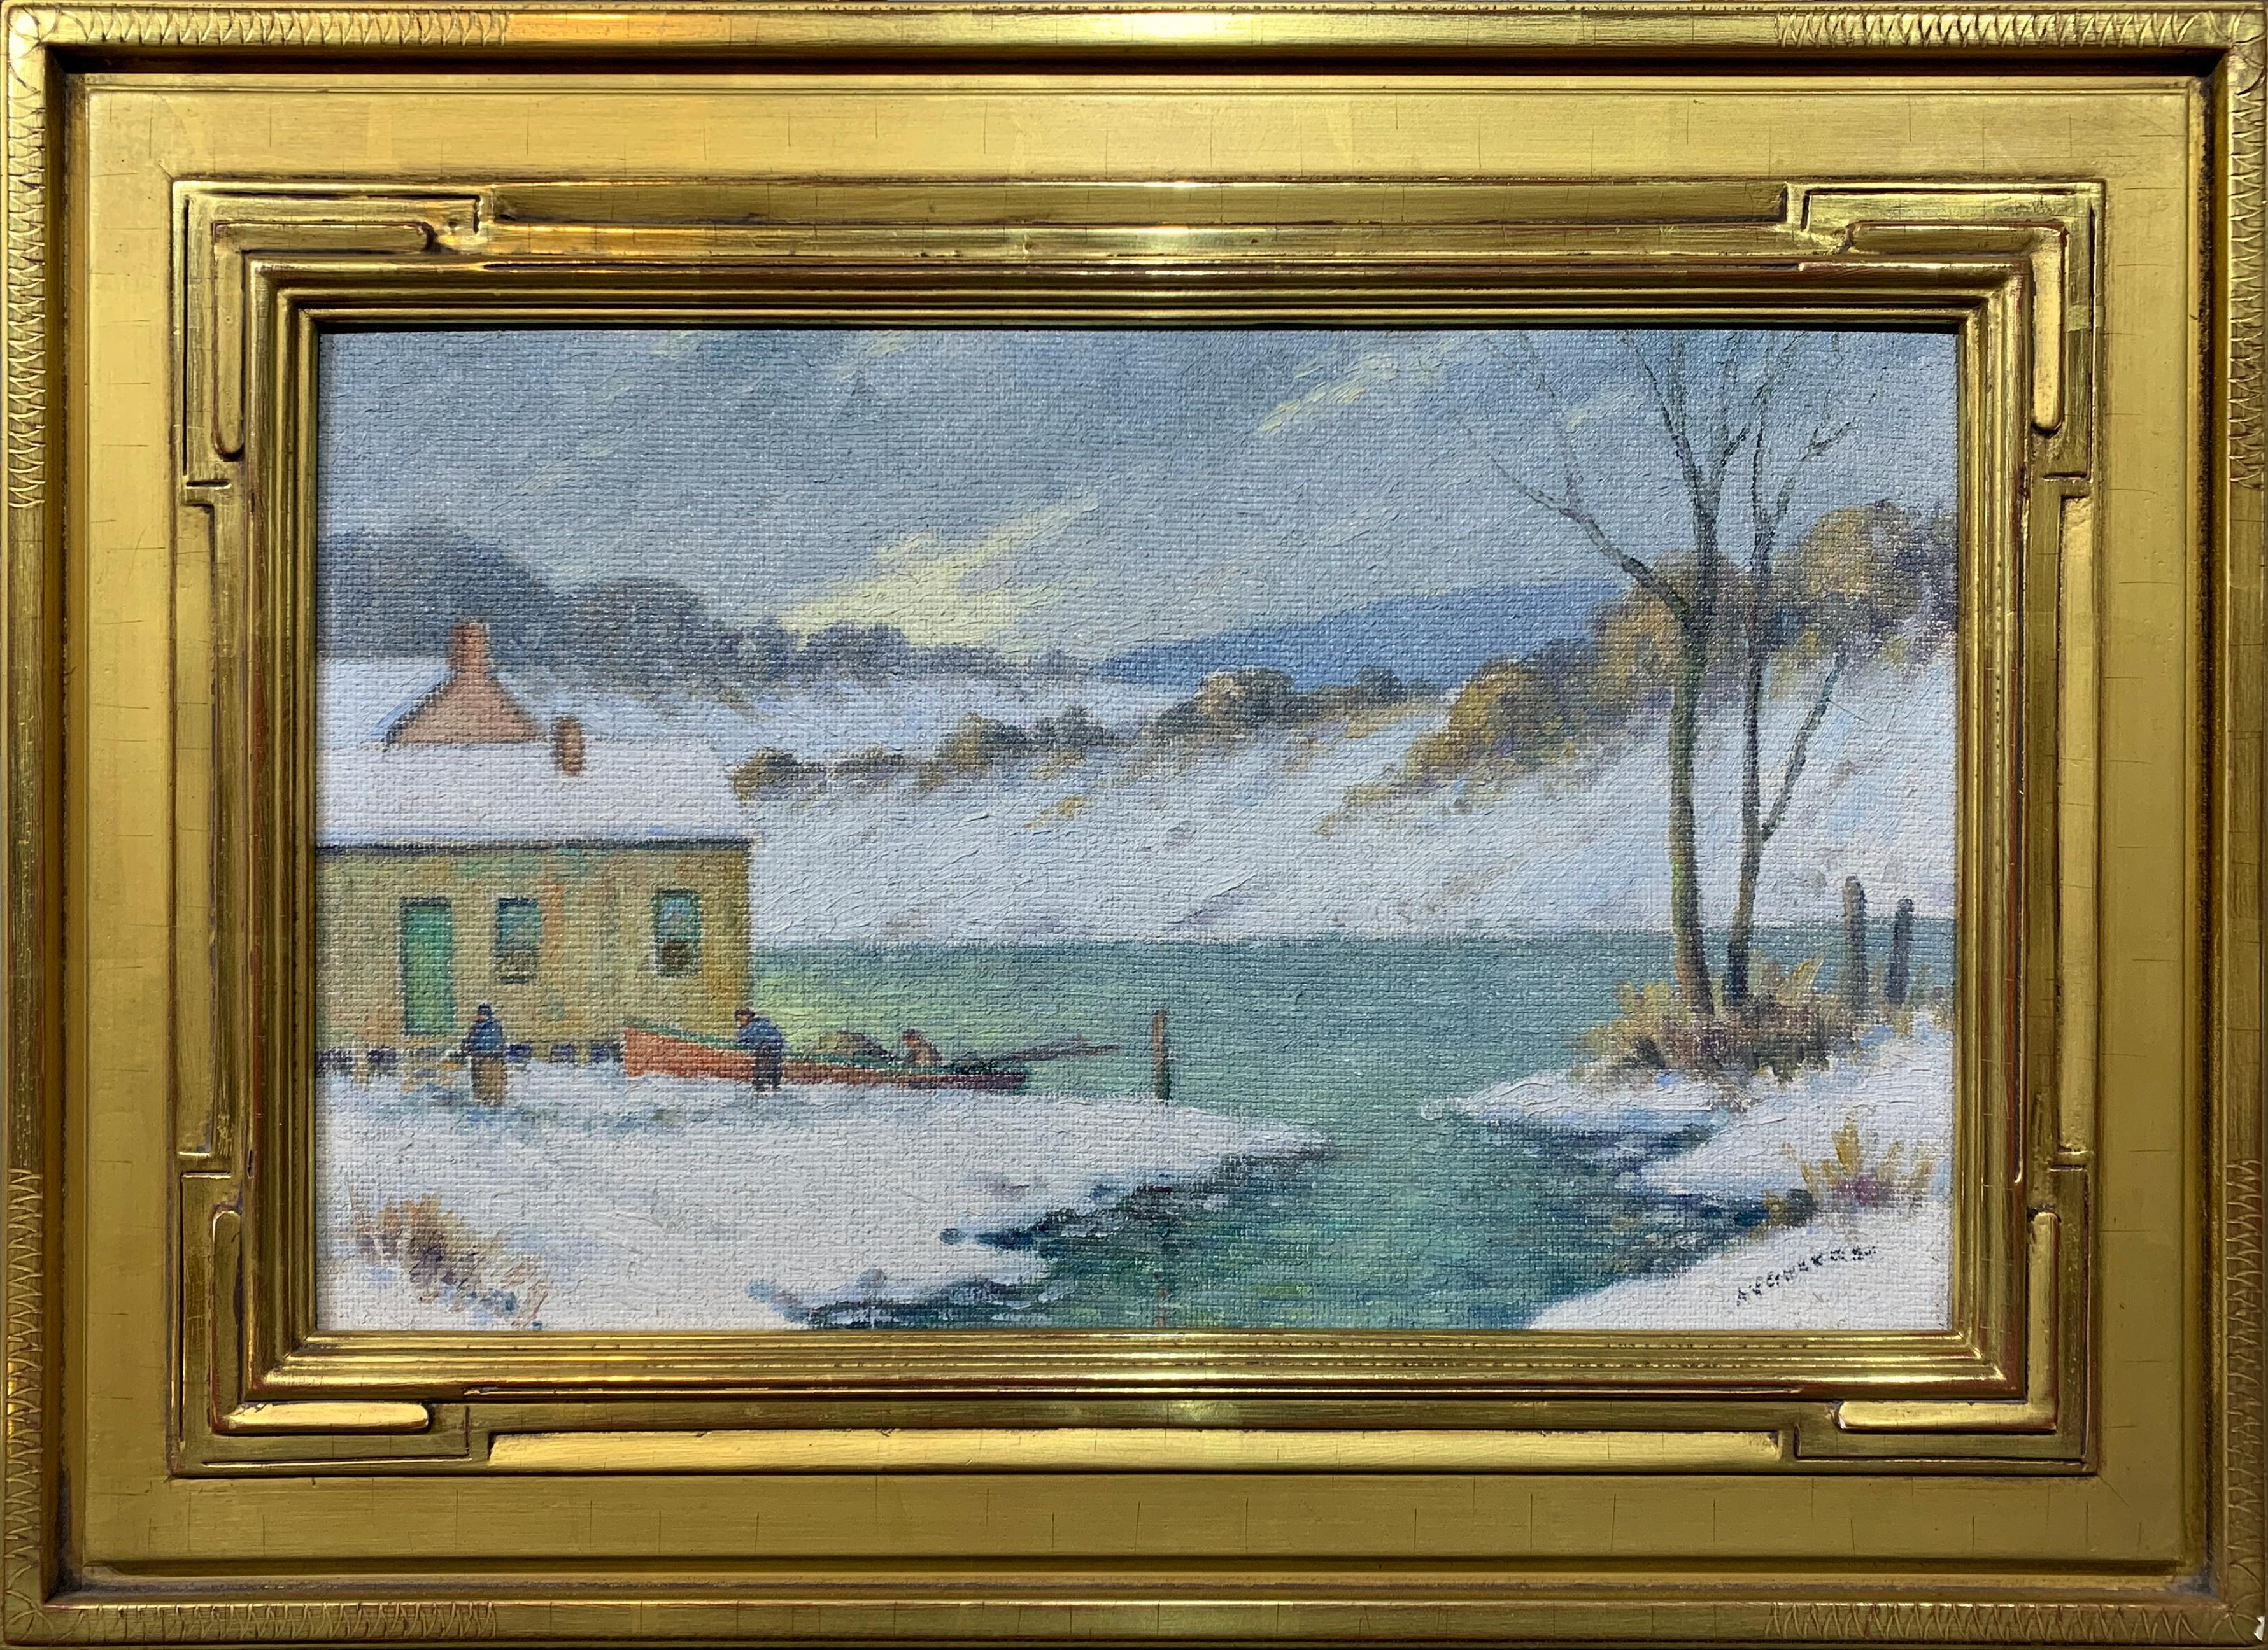 Winter Fishermen, American Impressionist Snowy Landscape by the River